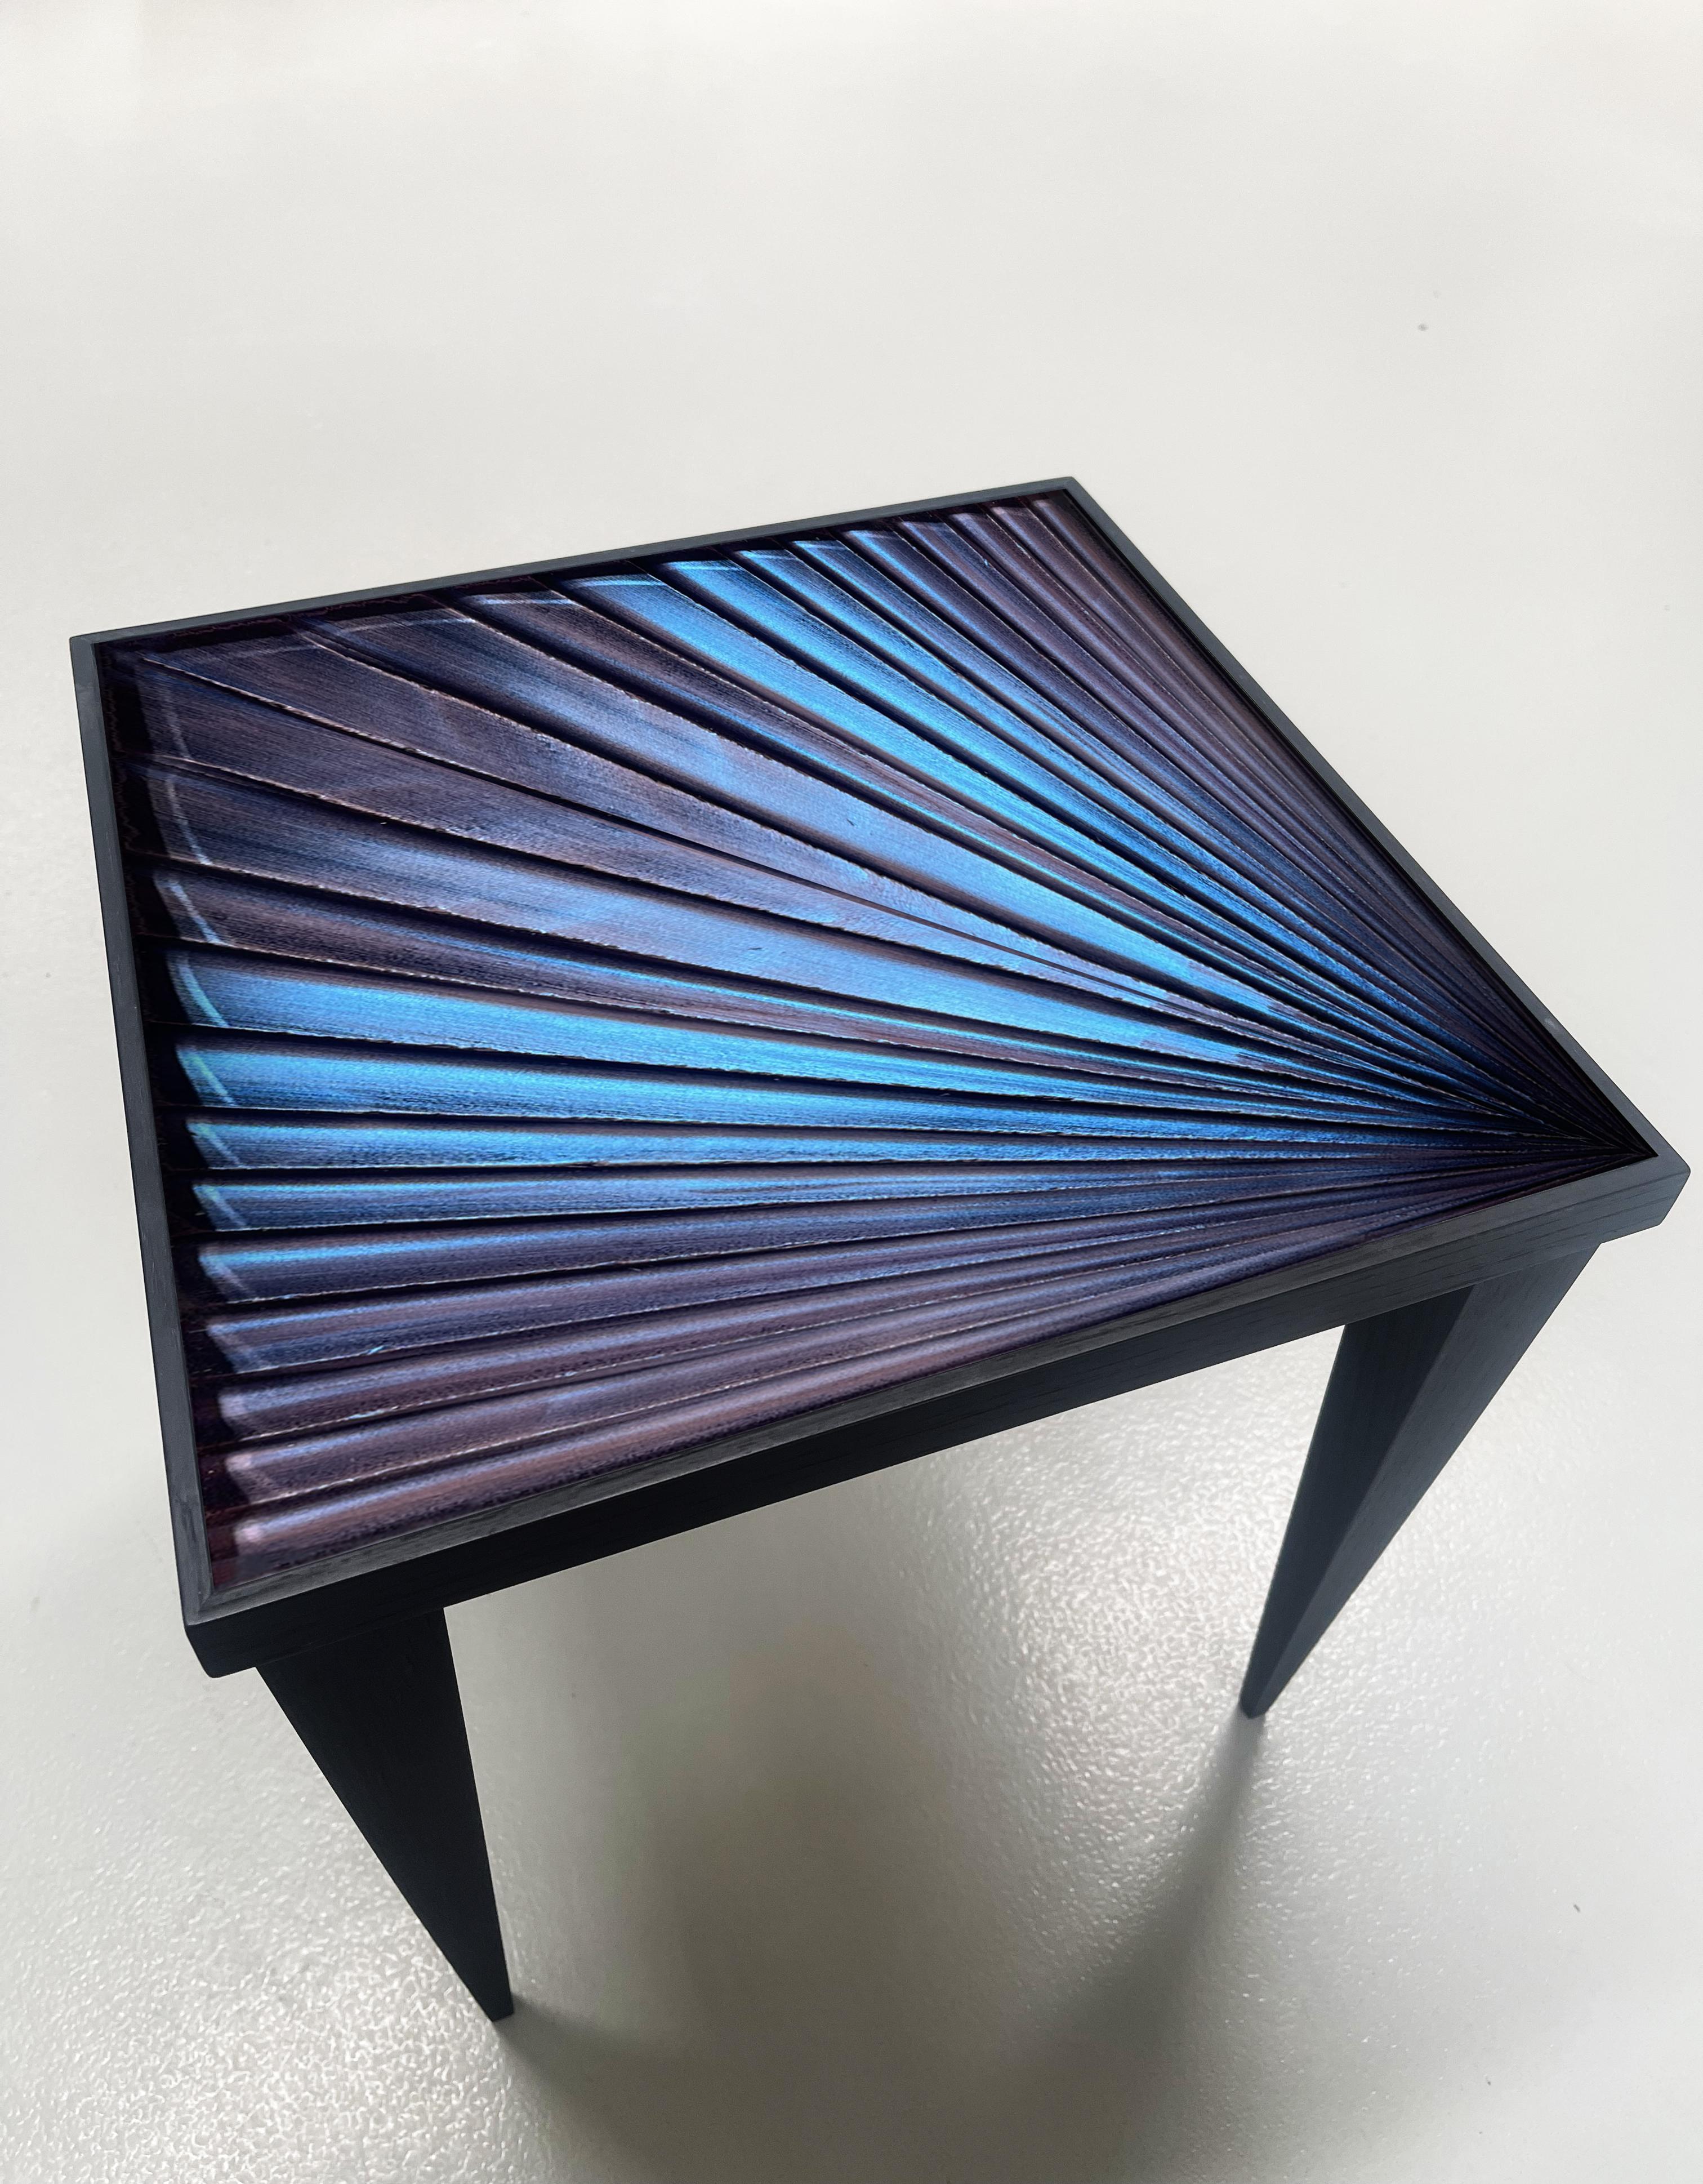 Hand-Crafted Contemporary ‘Square’ Table Blue Crystal and Oak Wood Handmade by Ghirò Studio For Sale